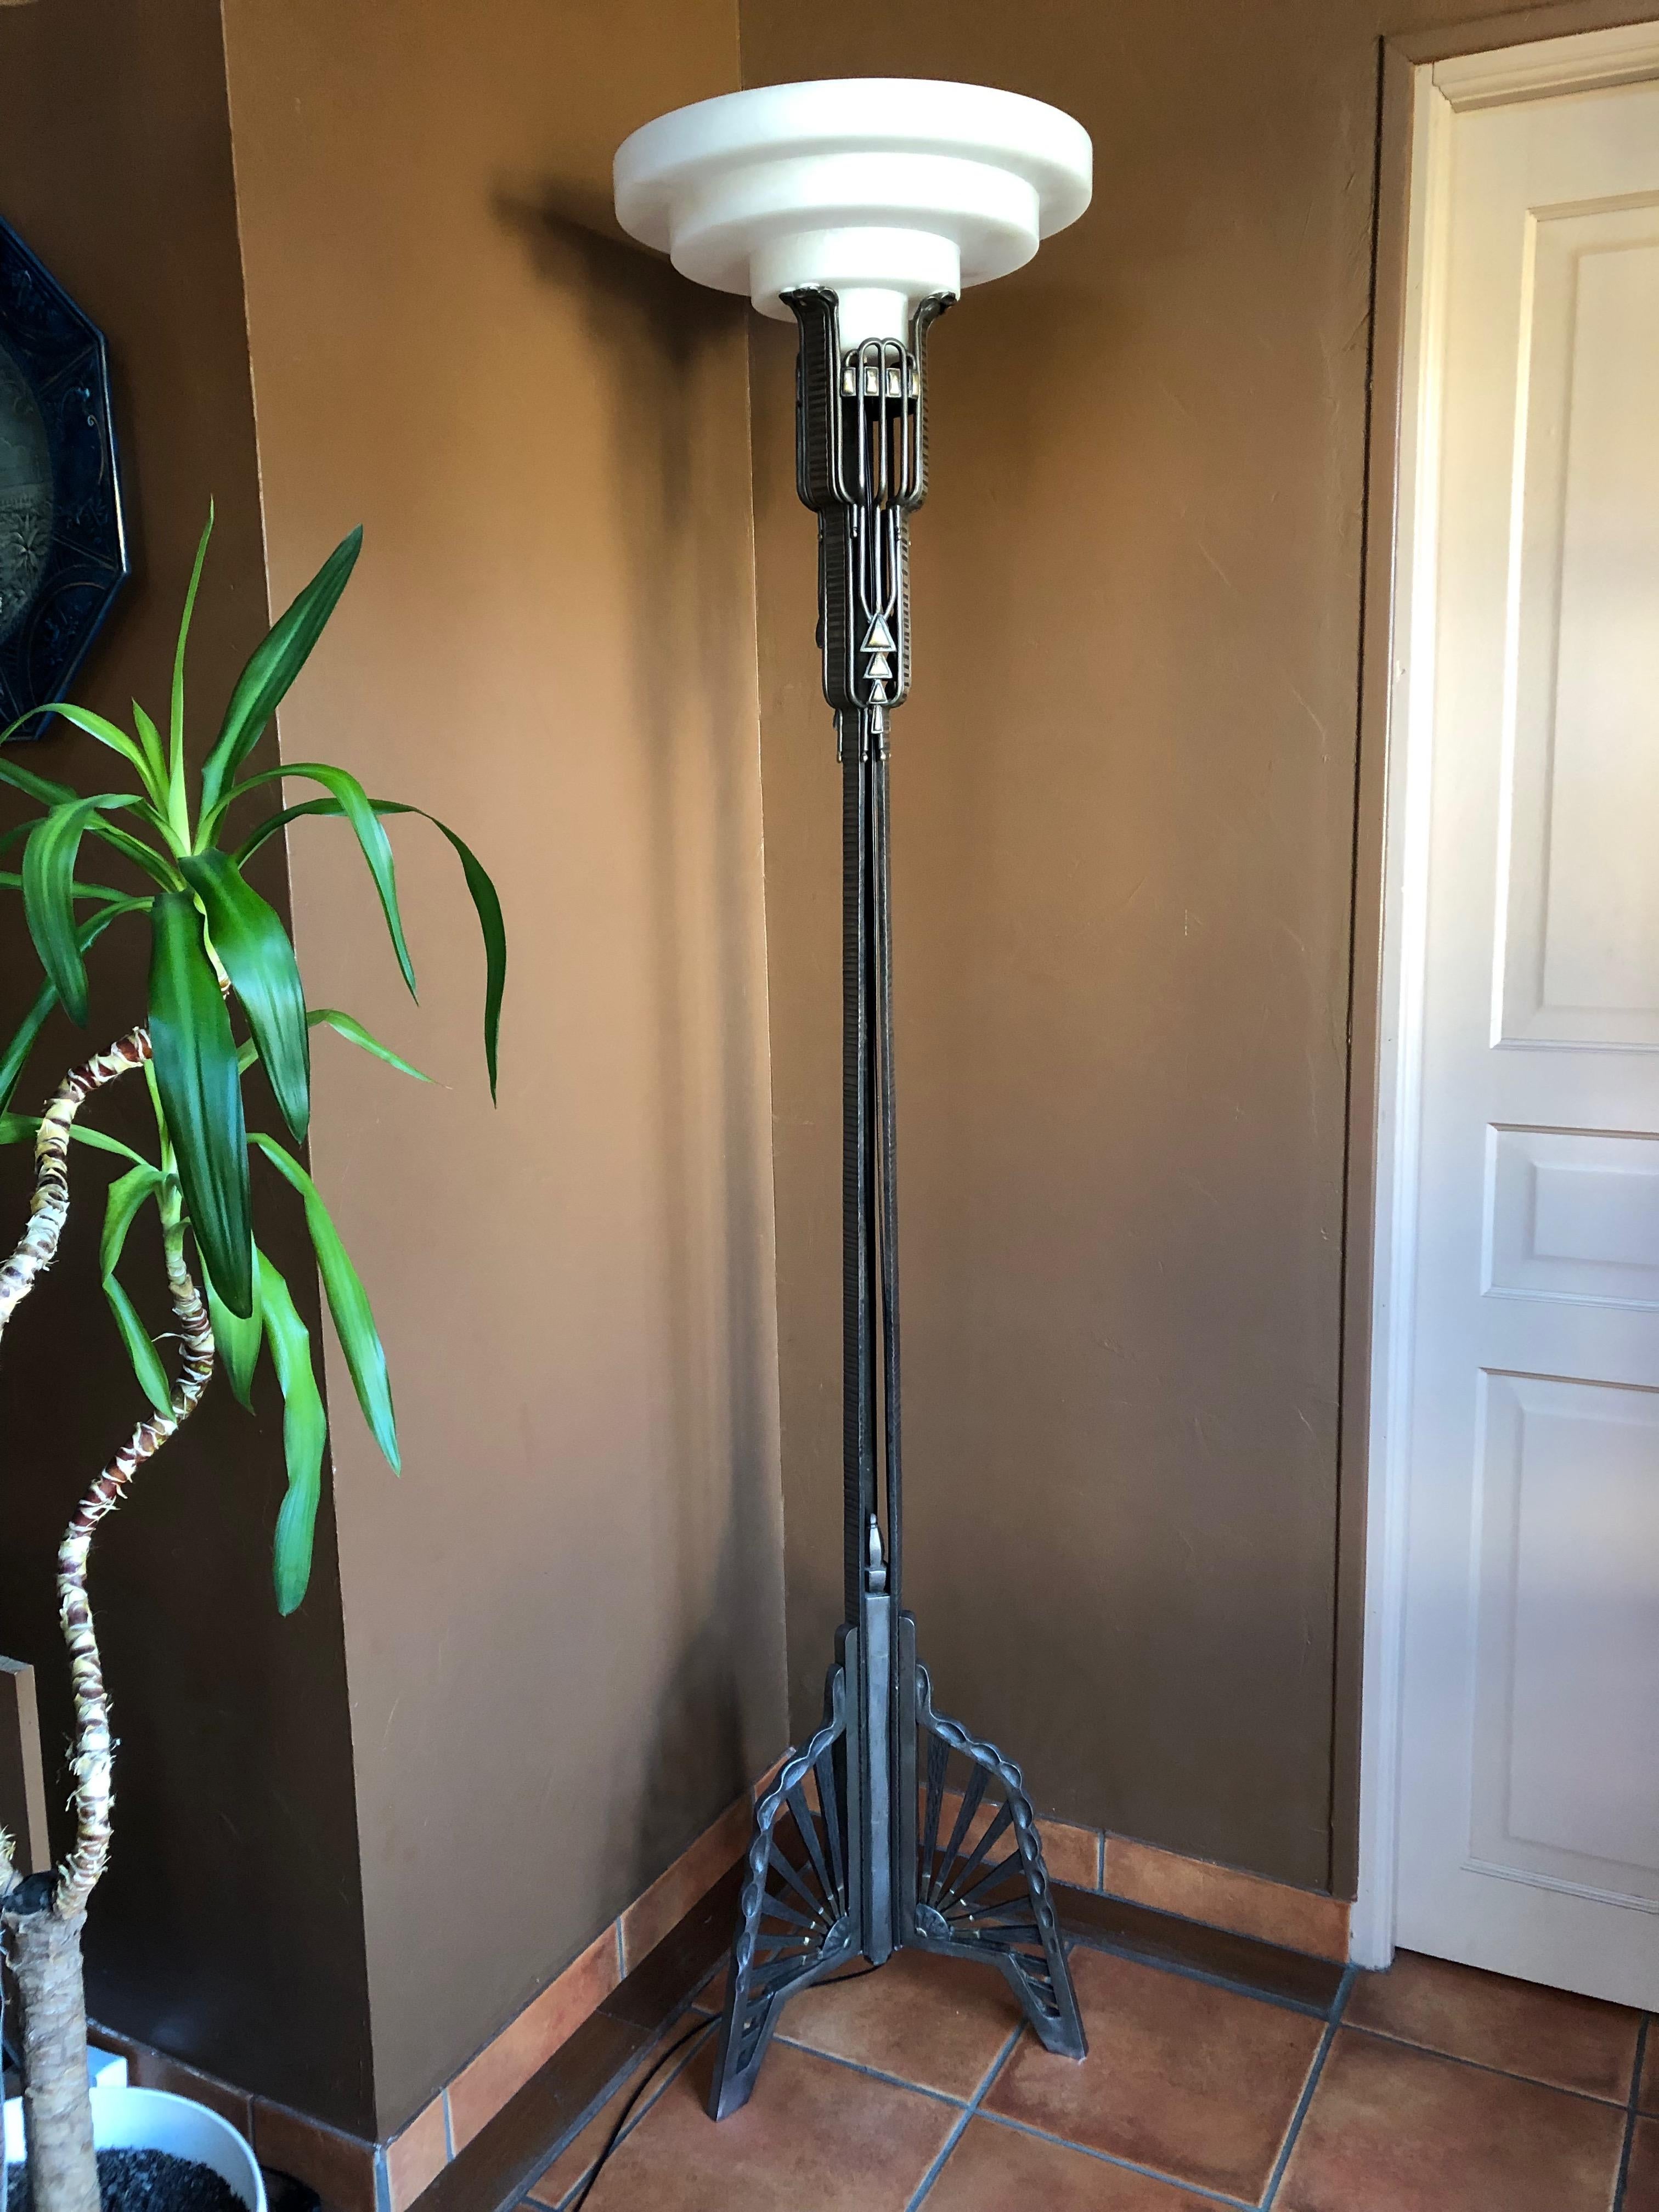 Art deco floor lamp circa 1925 attributed to Louis Majorelle.
Wrought iron with bronze applications. Very good quality wrought iron.
Electrified and in perfect condition.
The basin will be packaged separately from the base of the floor lamp

Total